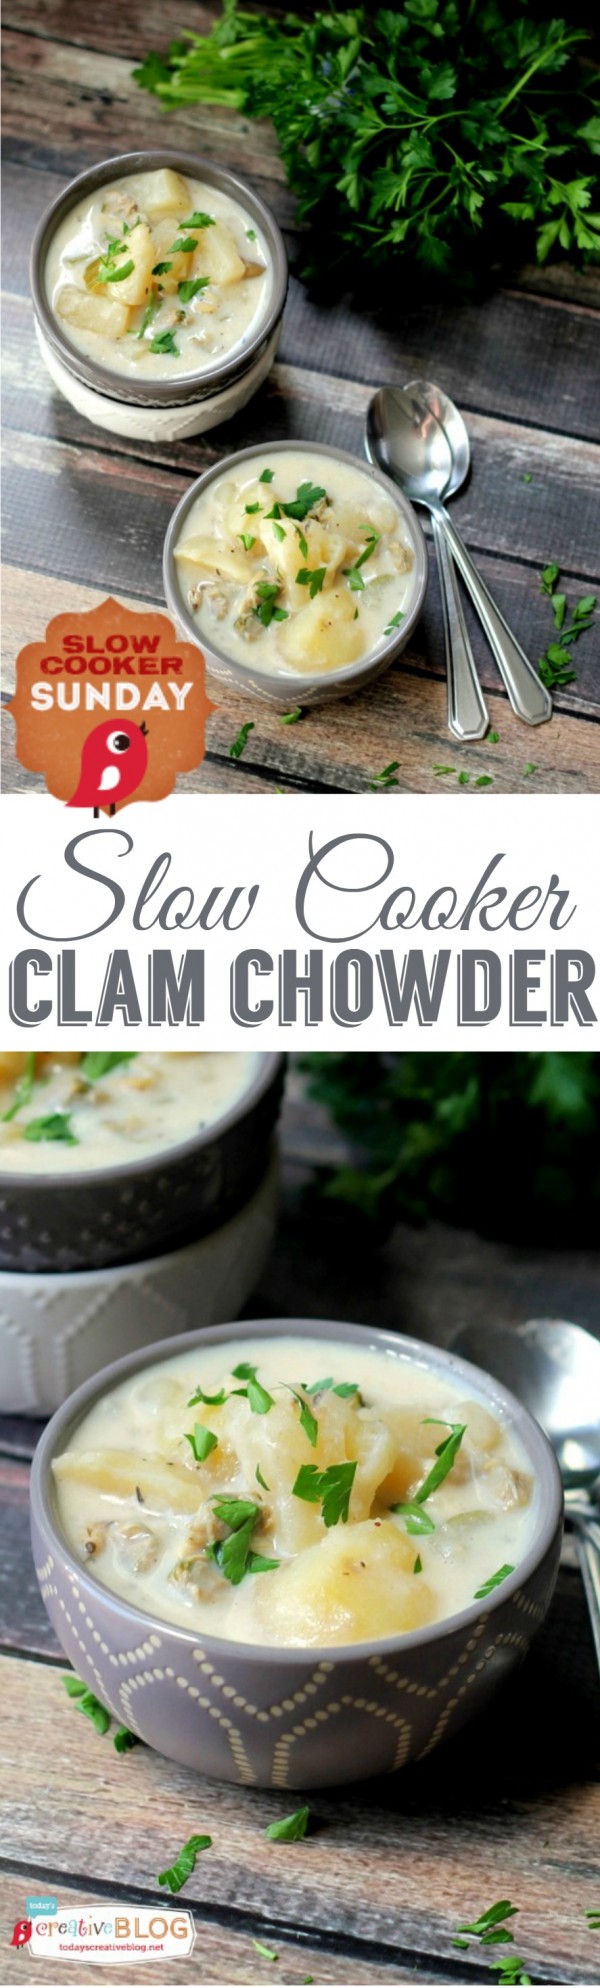 Slow Cooker Clam Chowder | Clam Chowder with no bacon | Creamy with chunks of potatoes. Crockpot dinner ideas | TodaysCreativeLife.com